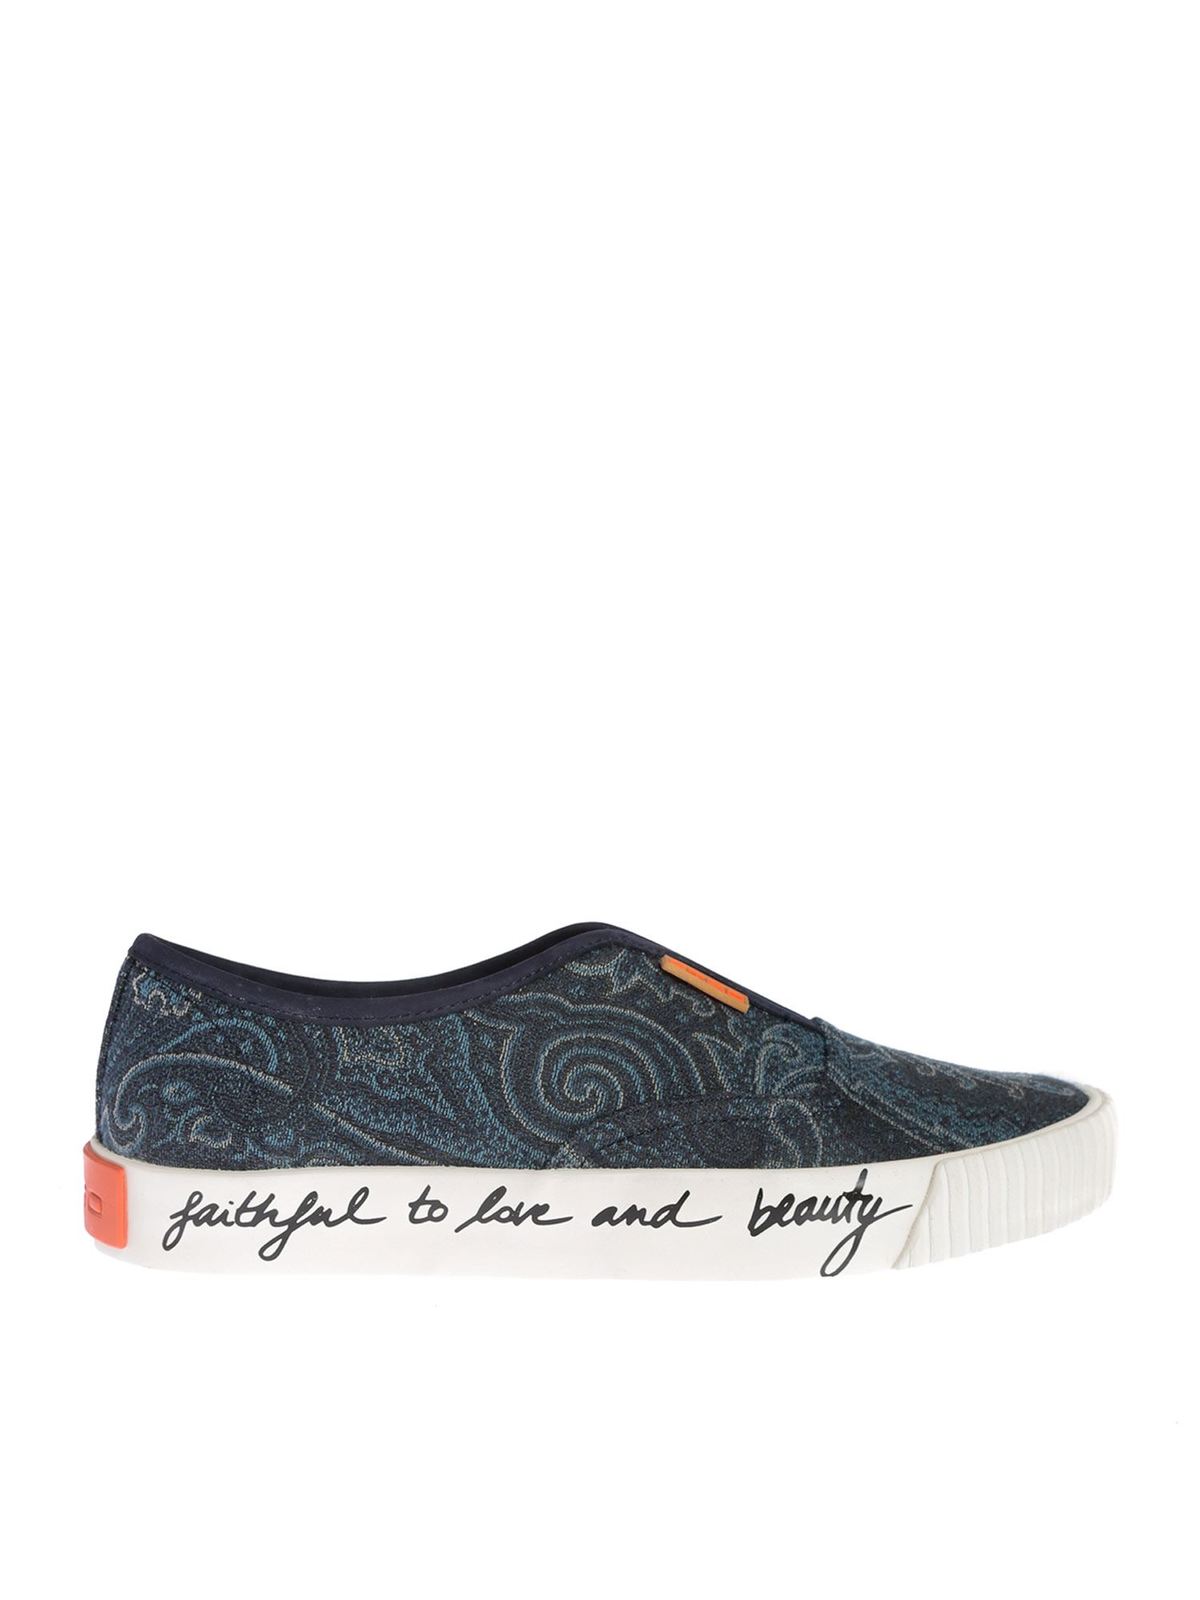 ETRO PAISLEY PRINT SLIP ON IN SHADES OF BLUE